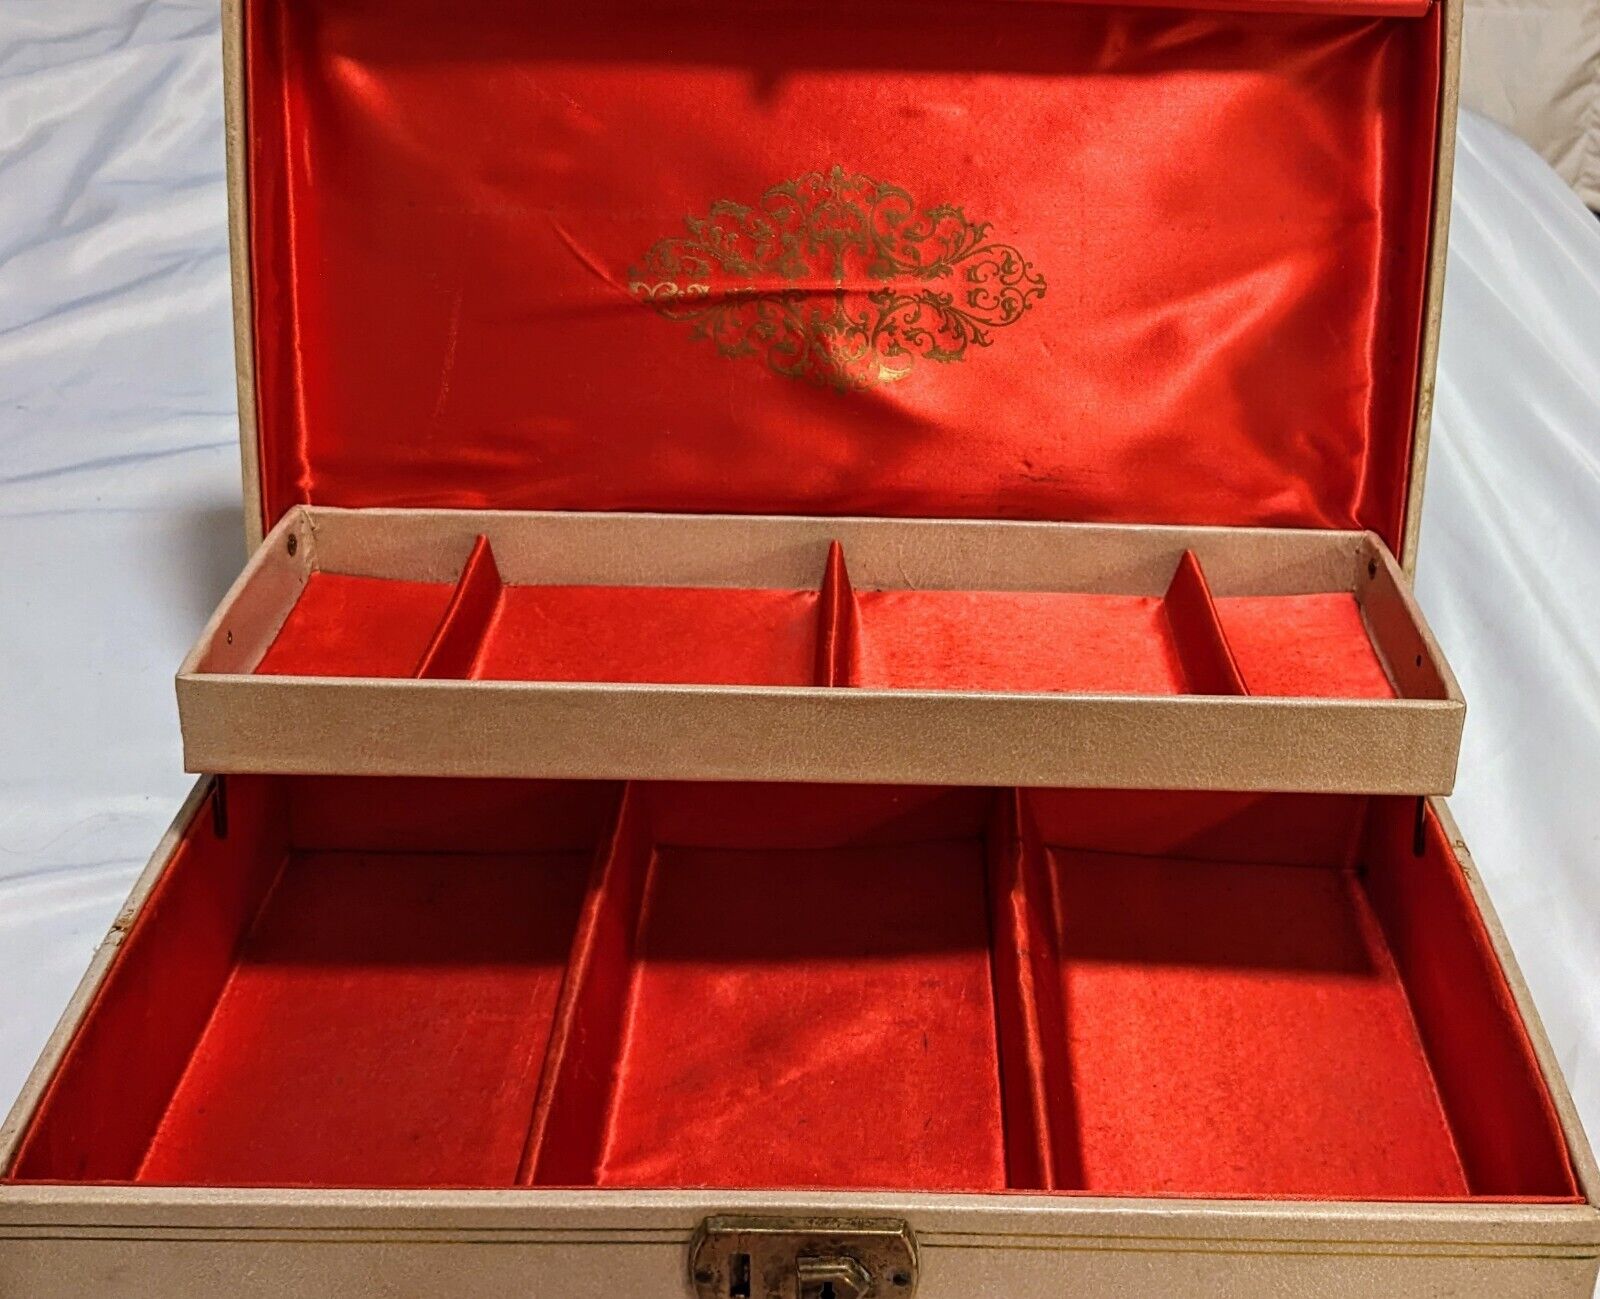 Vintage 1960's Mele Jewelry Box  2 Tier Off-White Red Satin Interior As Is